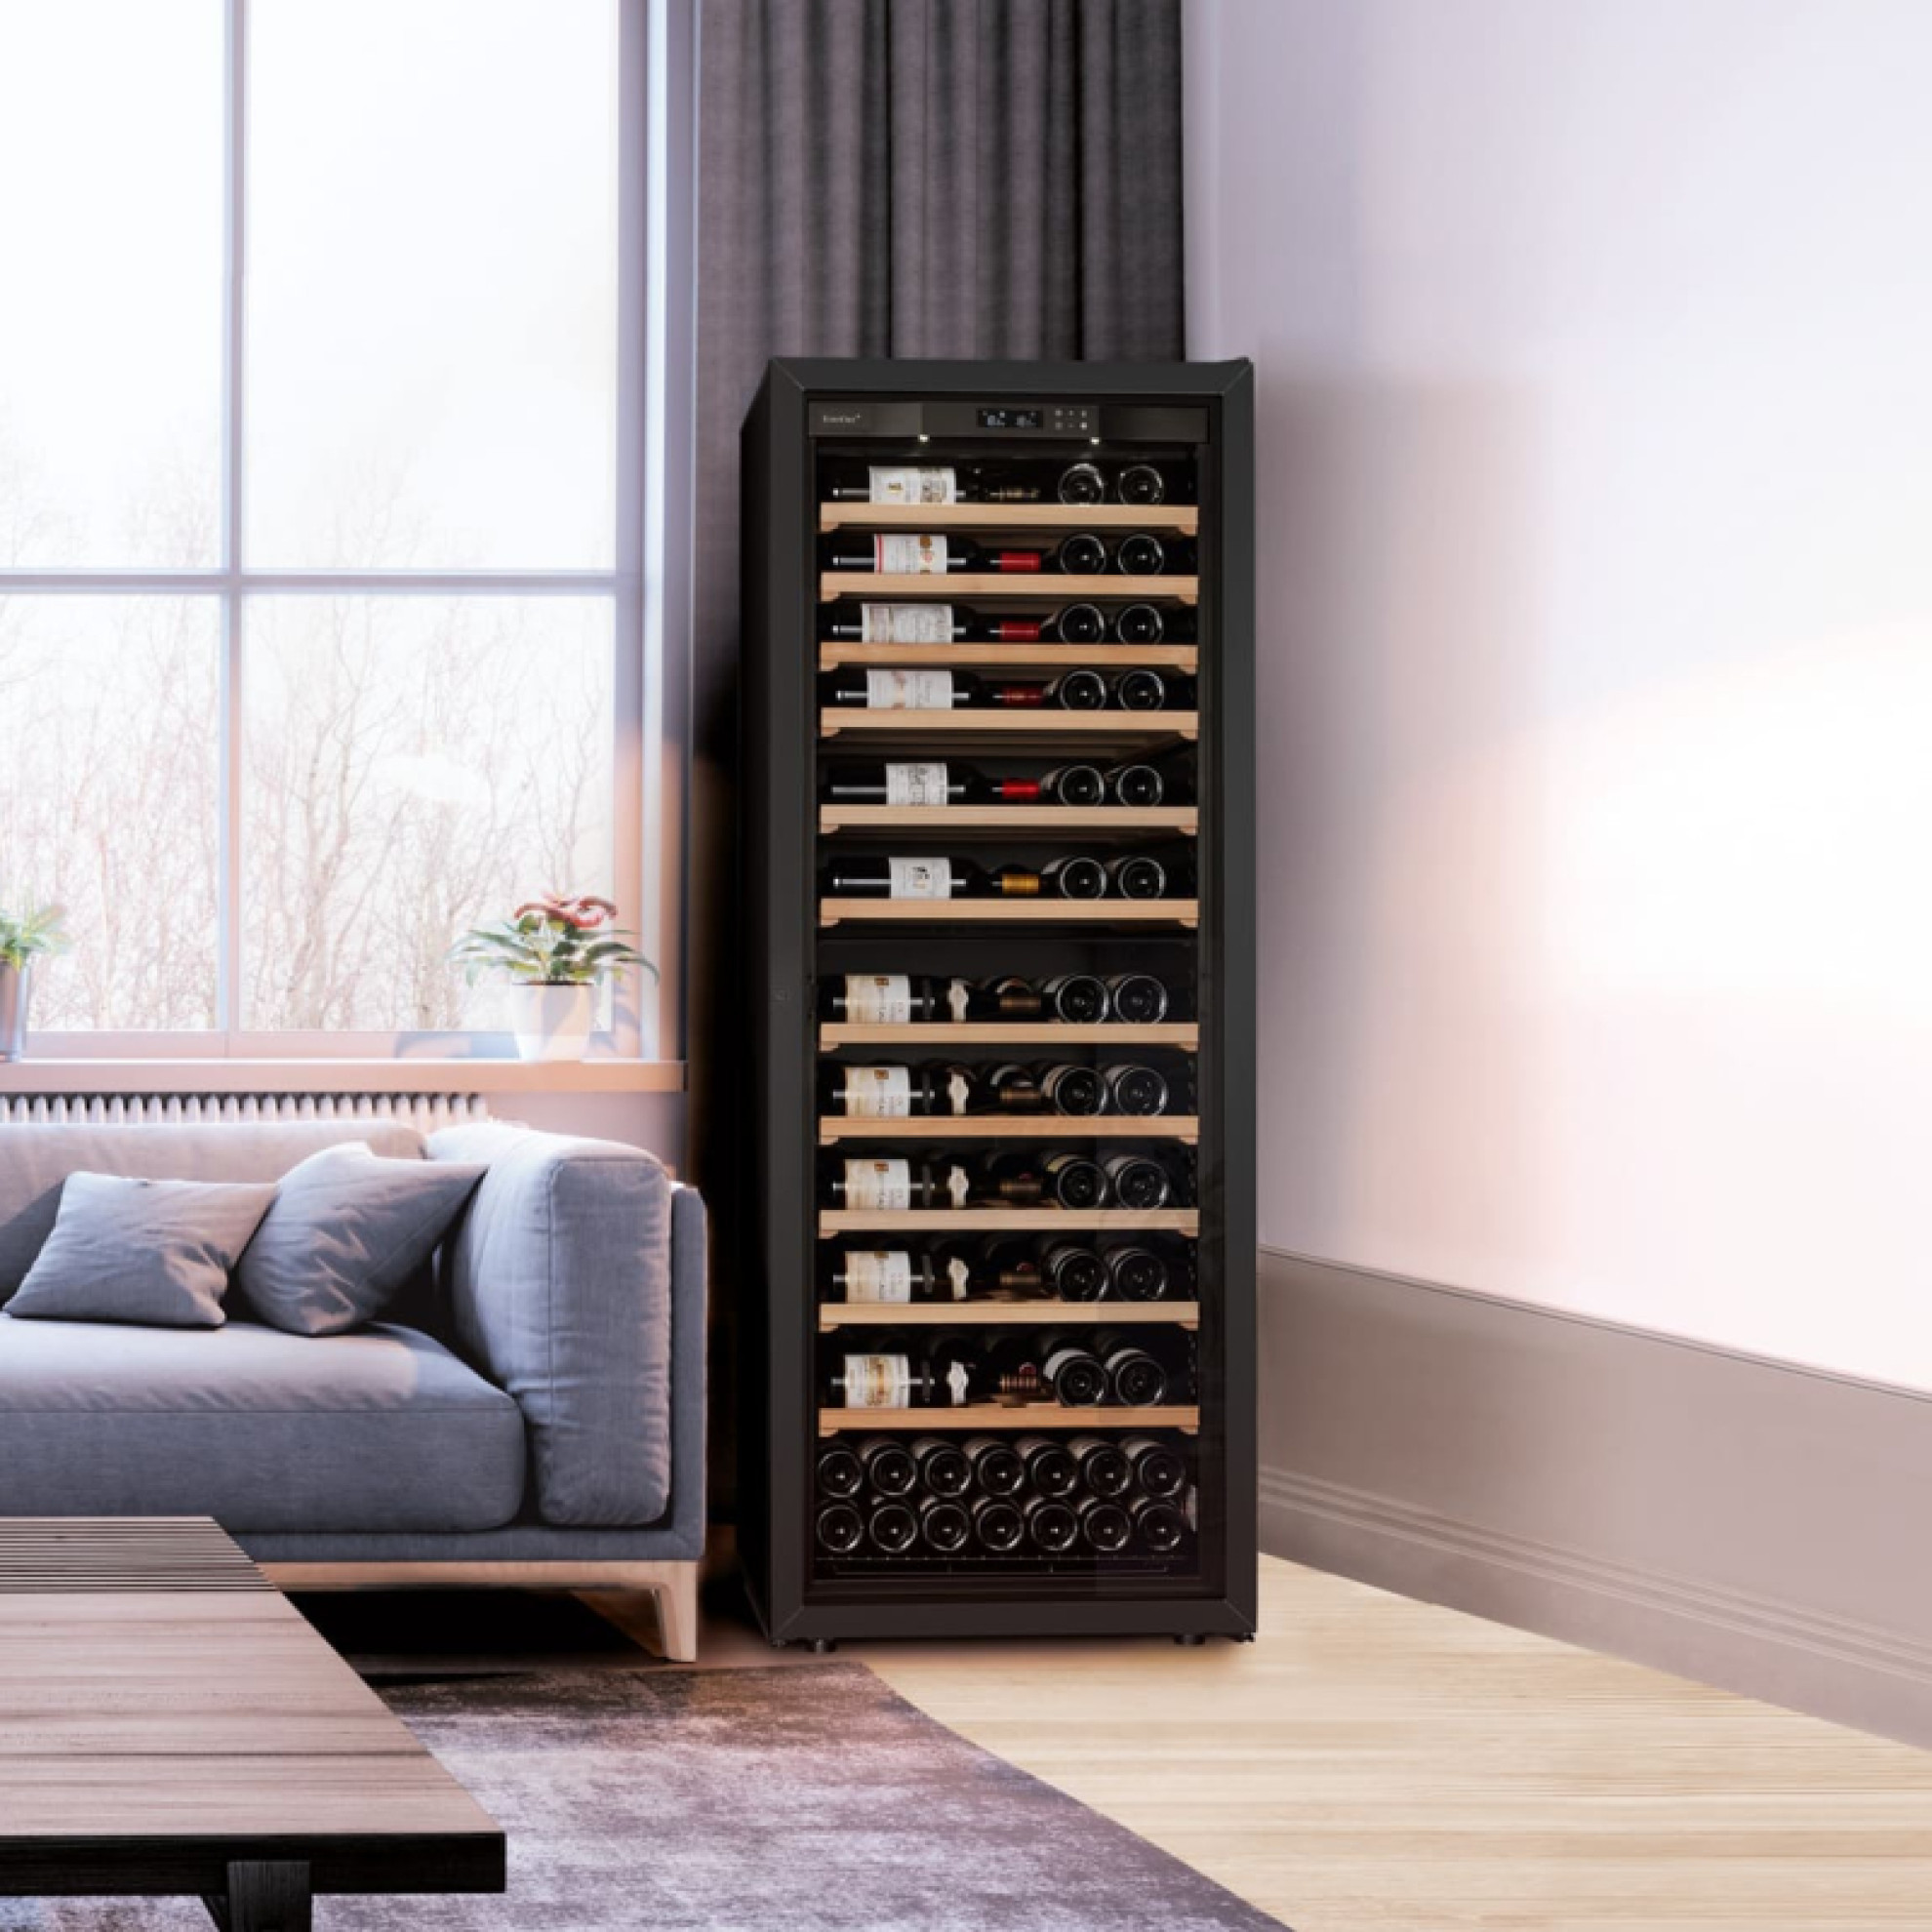 Large wine cabinet with glass door and free-standing black frame in a living room next to the sofa - La Première EuroCave